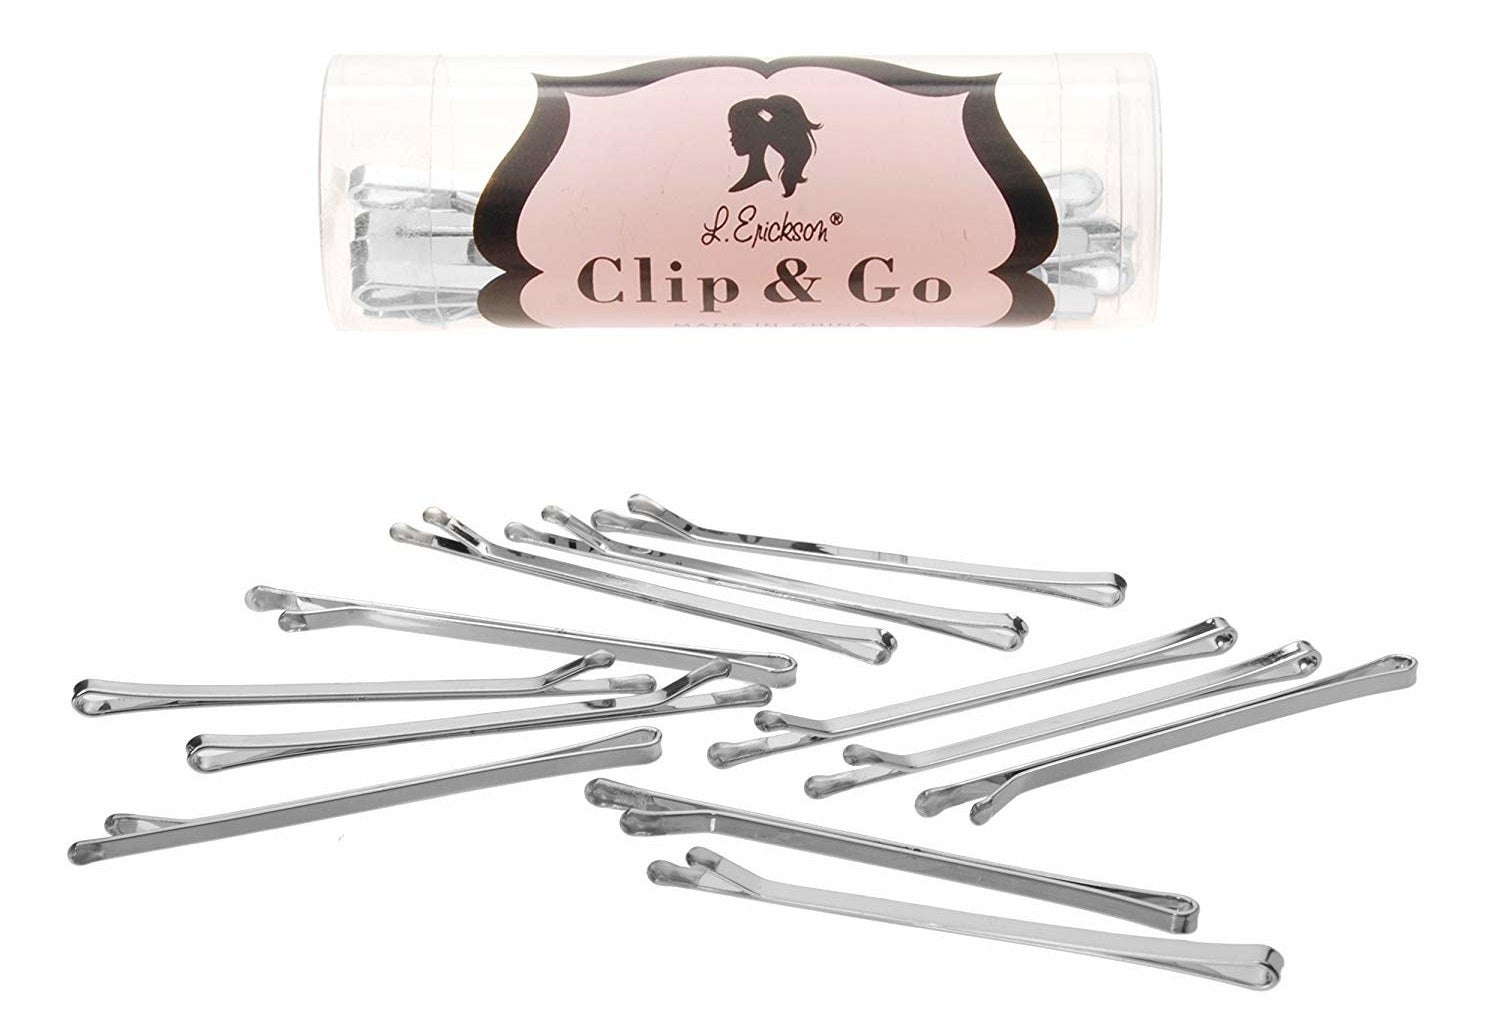 The silver bobby pins